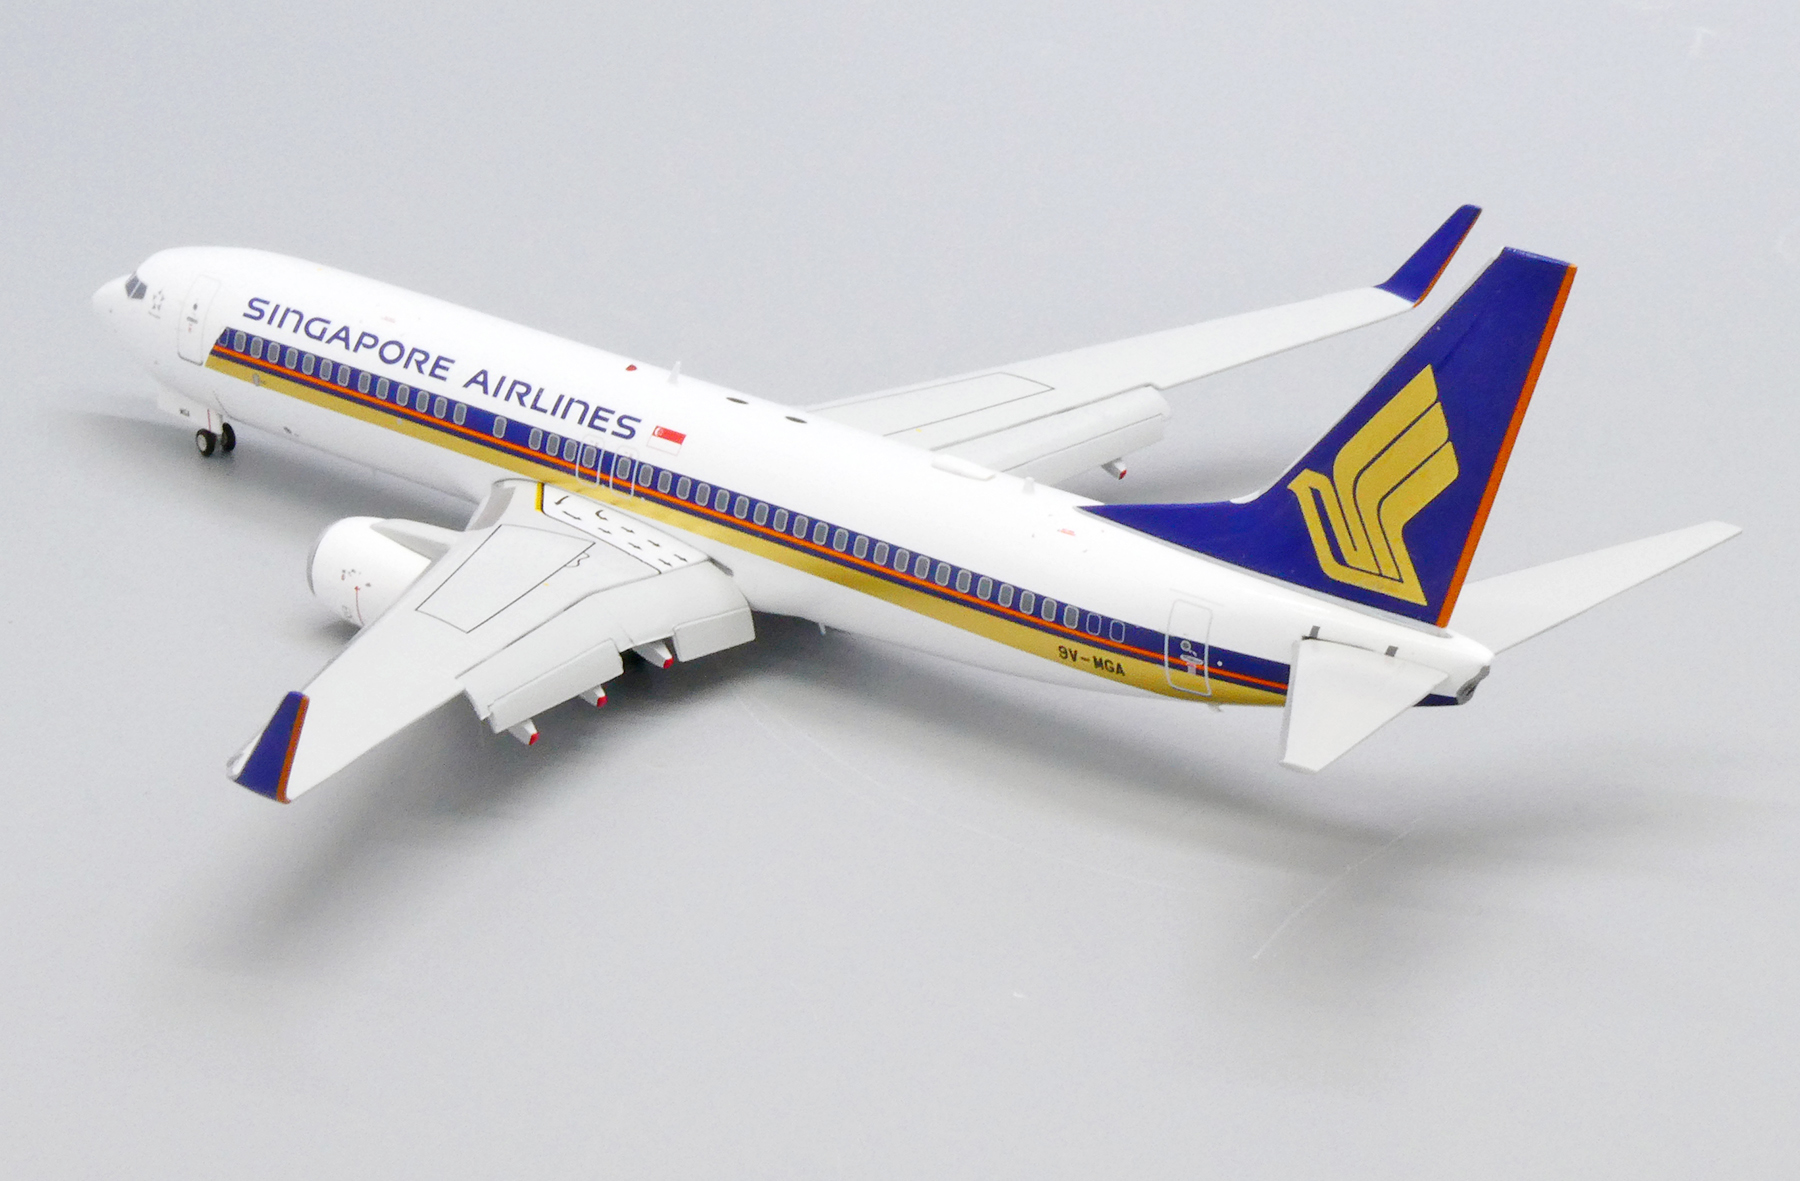 JC WINGS JCEW2738015 1/200 SINGAPORE AIRLINES B737-800 REG 9V-MGA WITH STAND